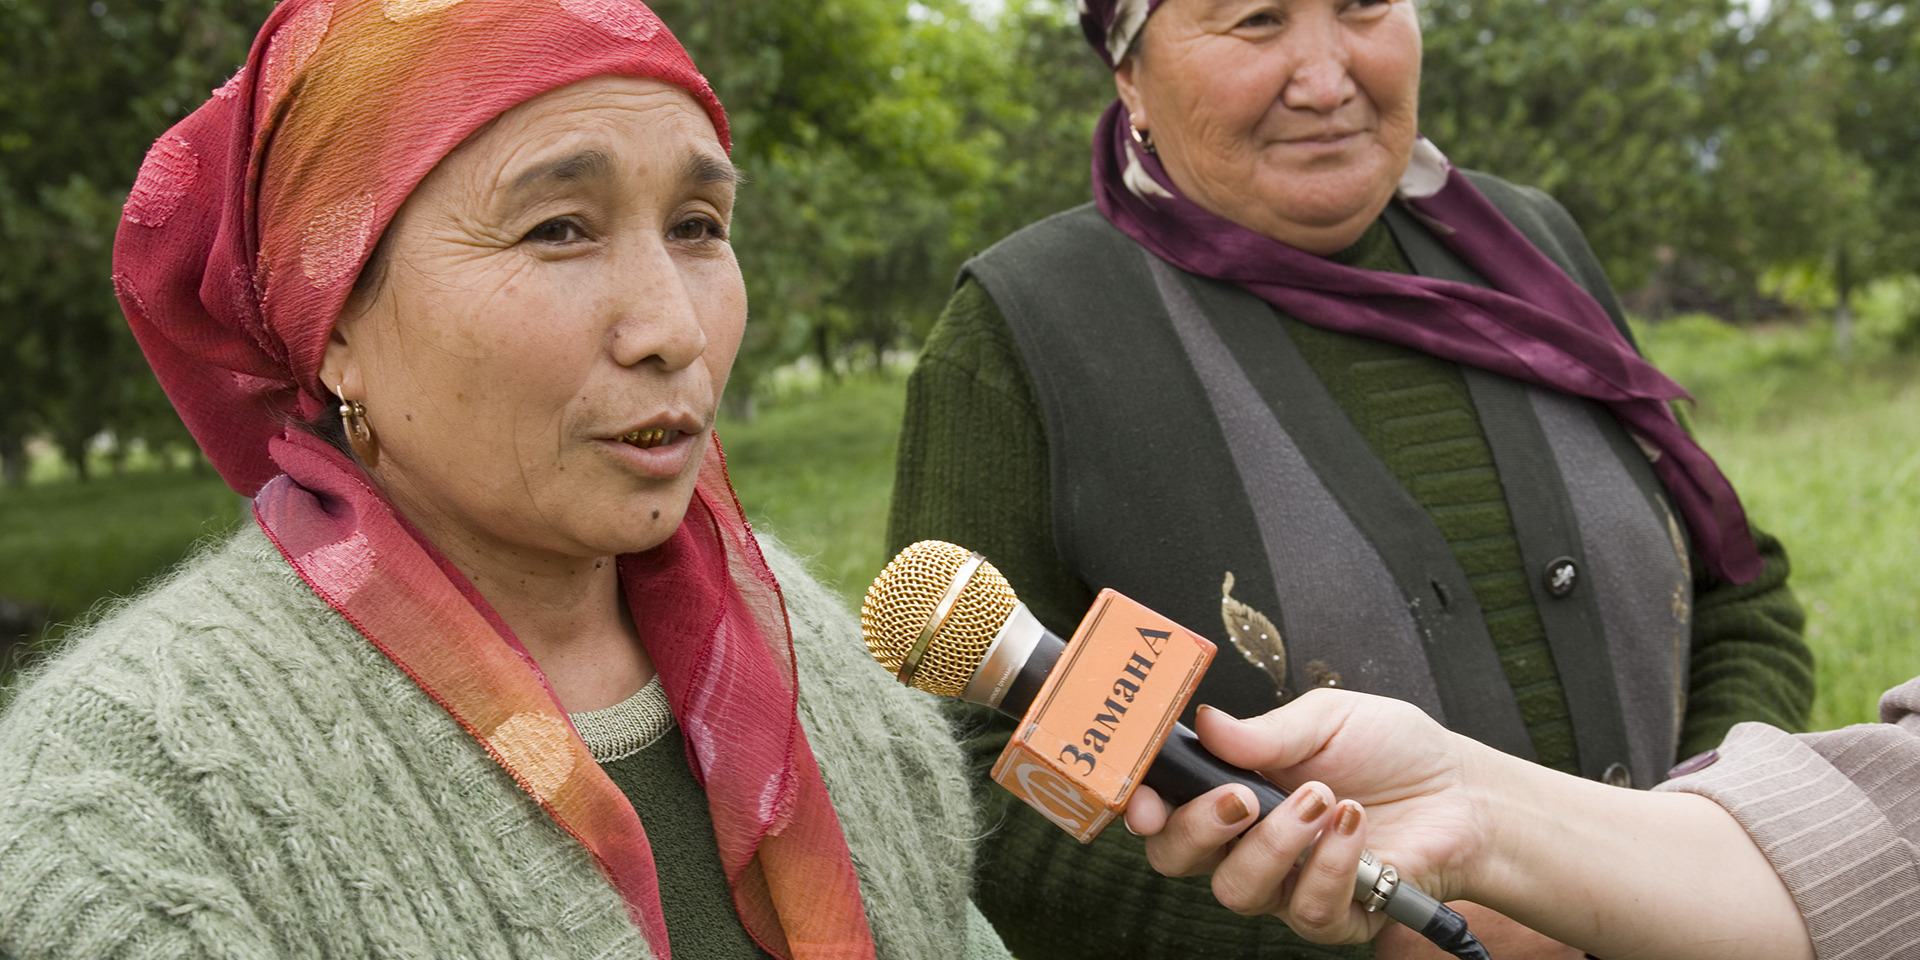 A woman being interviewed.